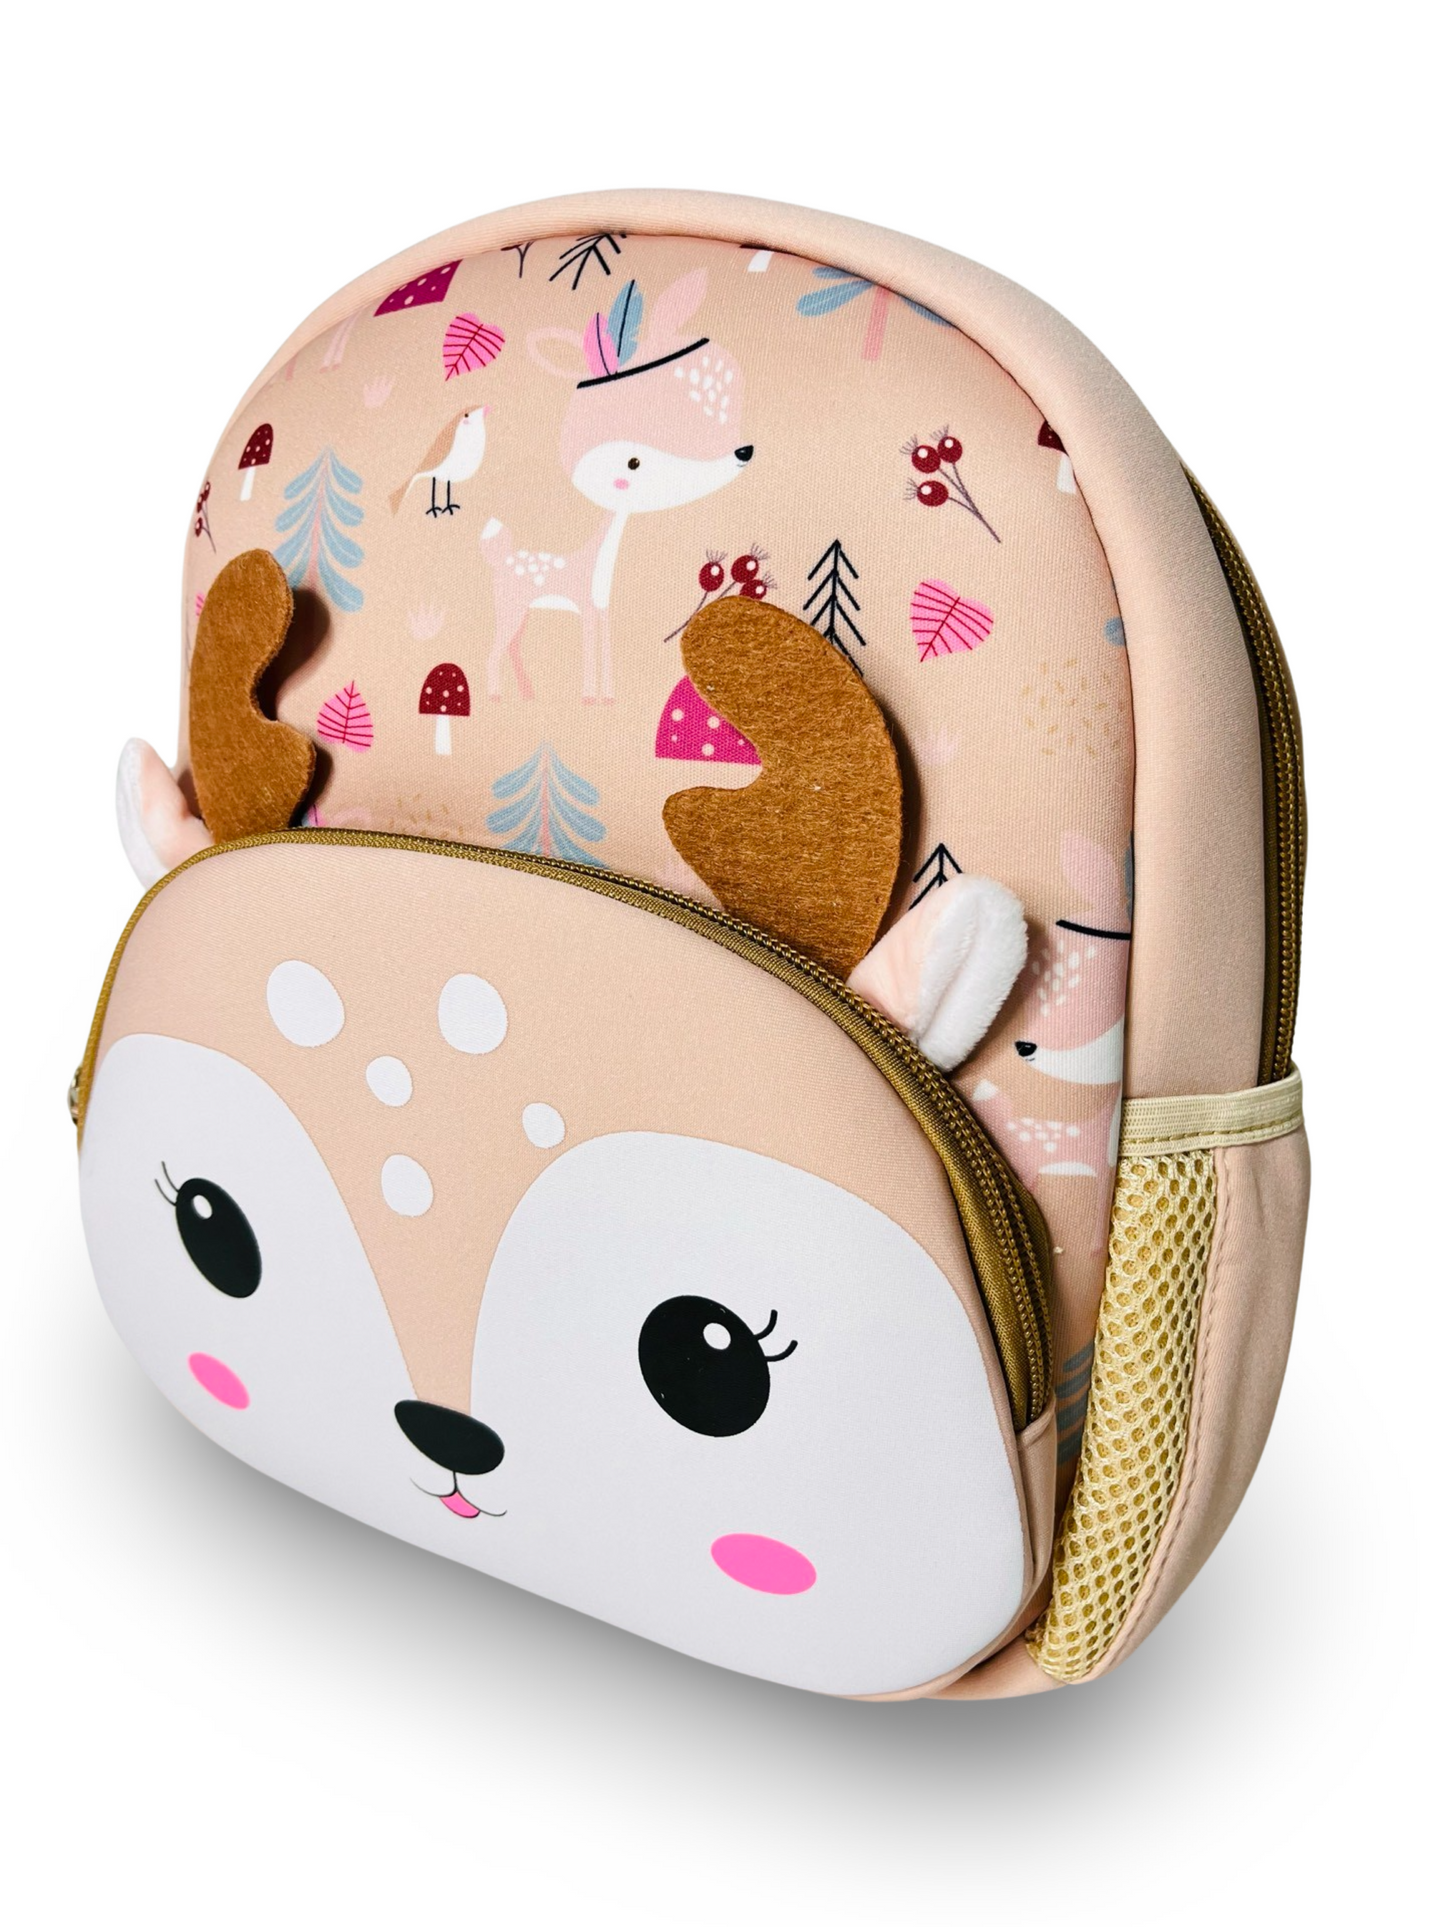 Cute Baby Reindeer Soft Plush Backpack with Front Pocket for Kids